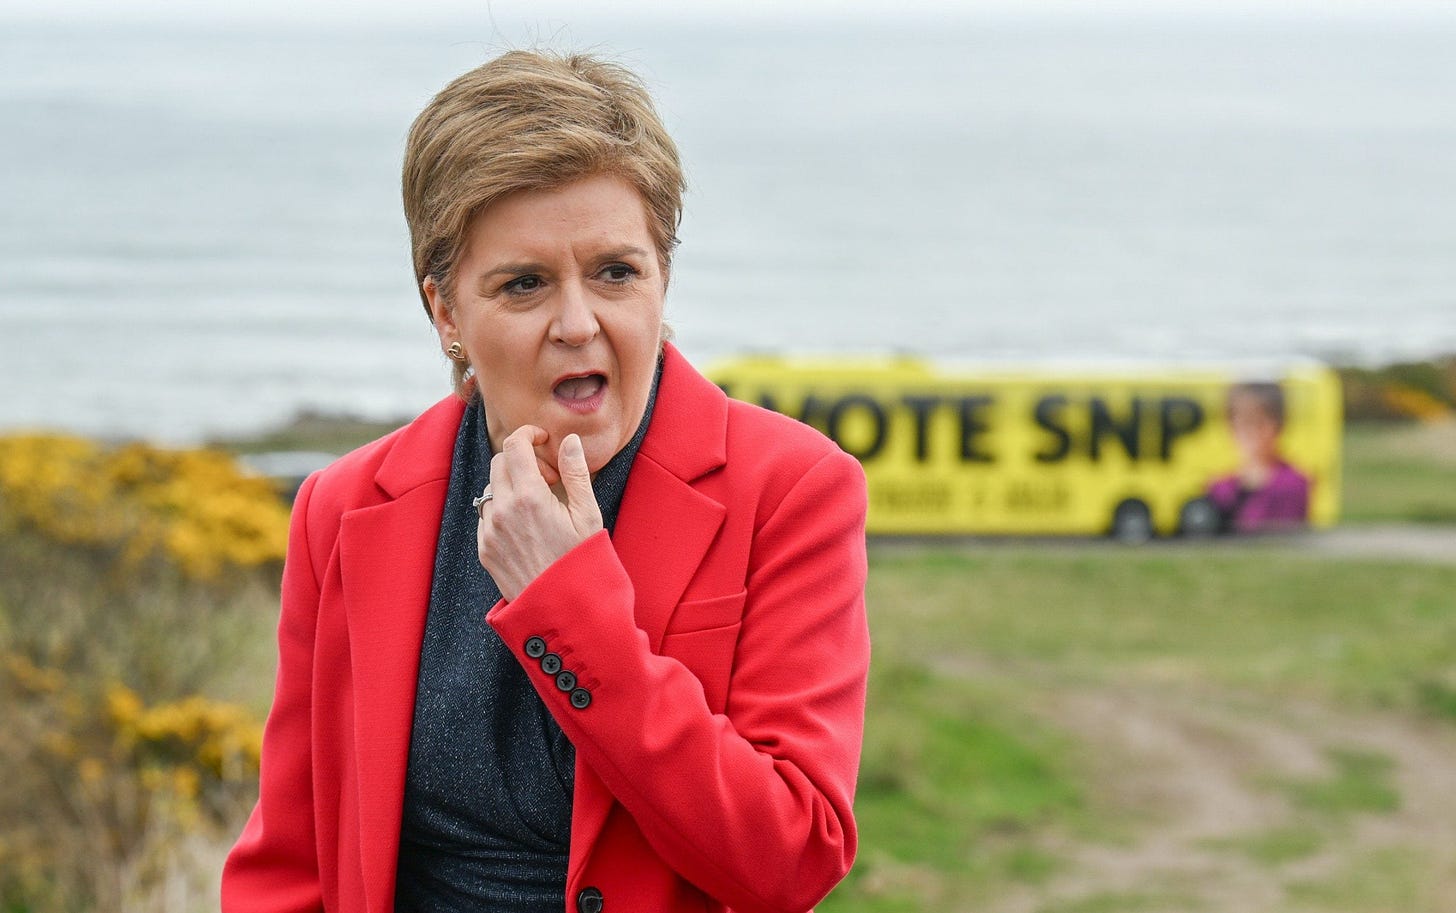 Let's hope the ferries and care home scandals will sink Sturgeon's election  chances